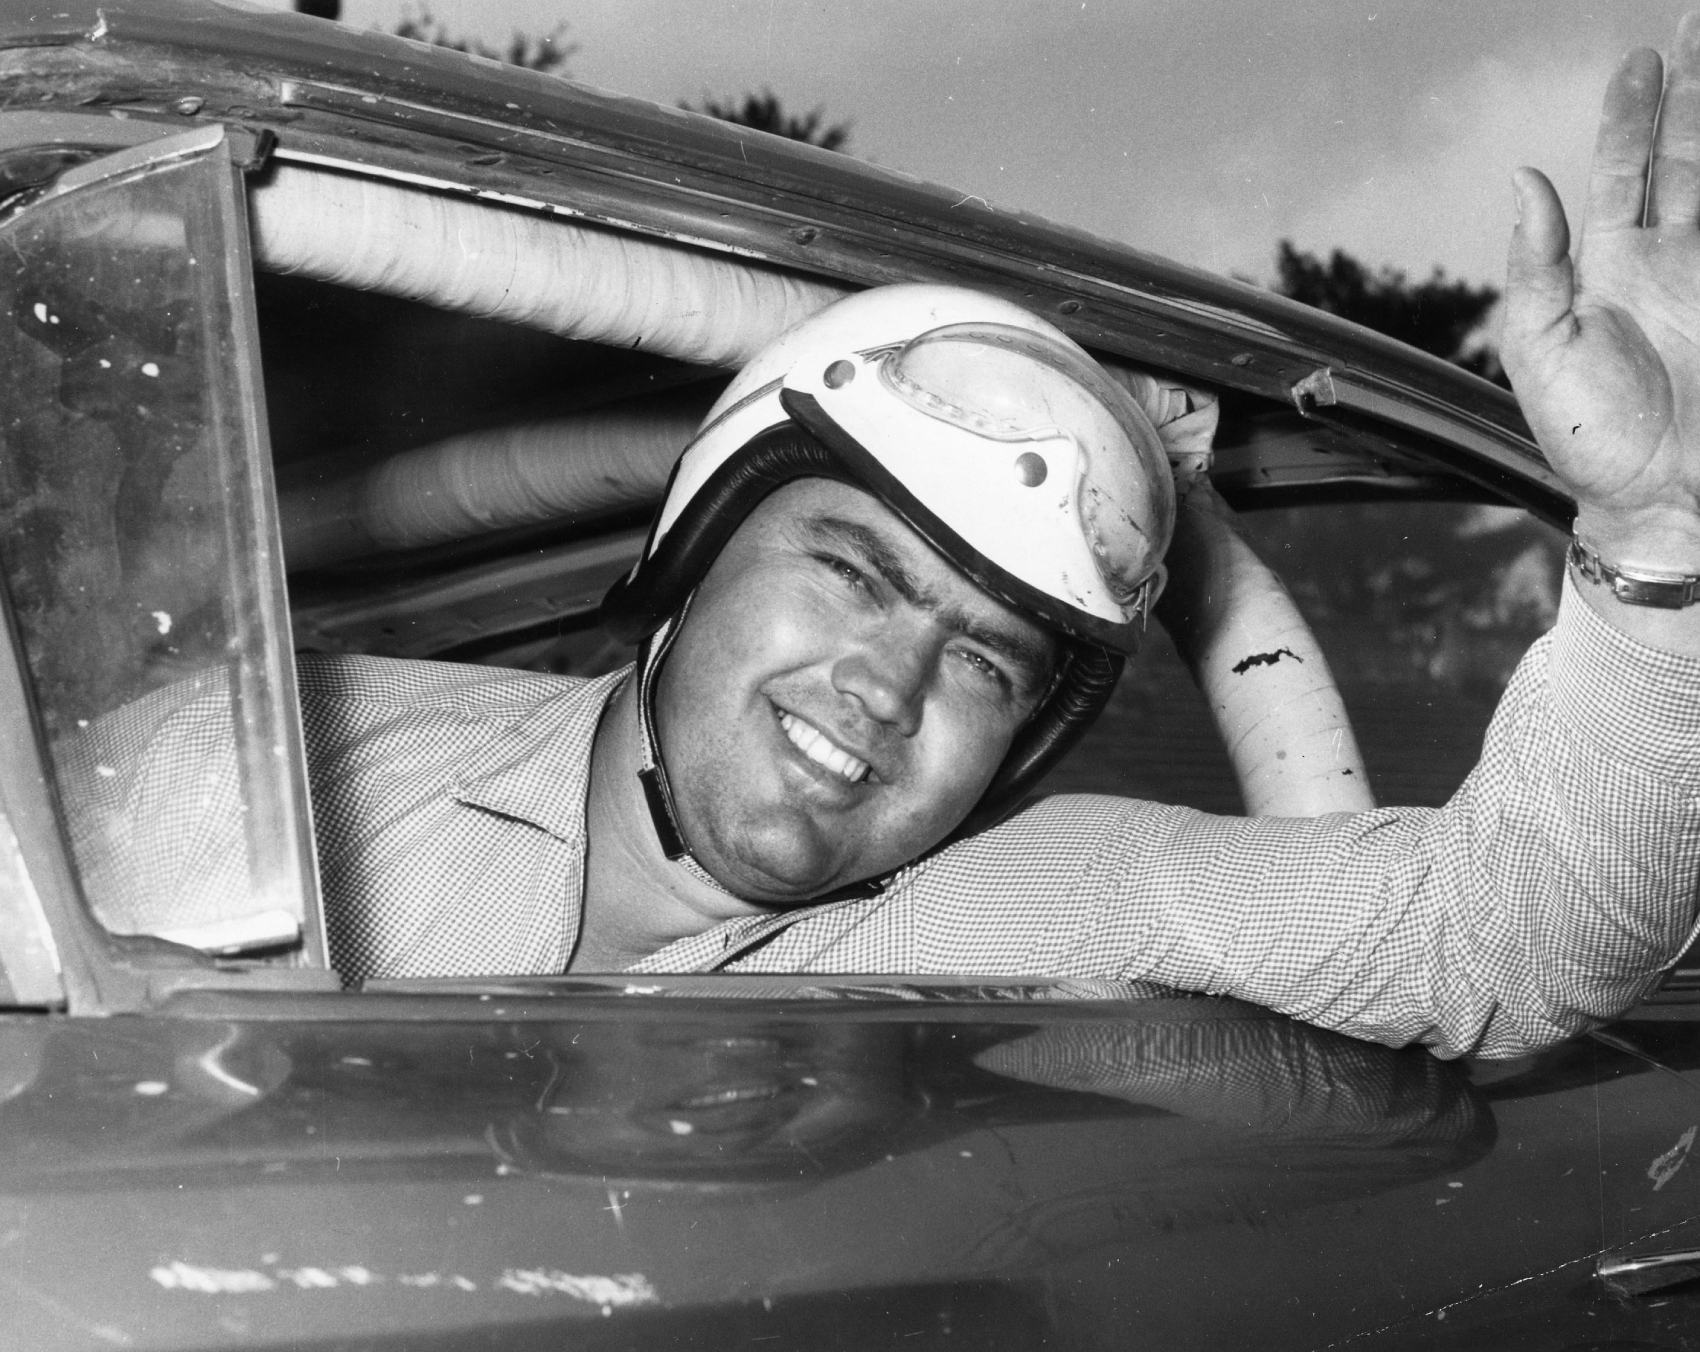 NASCAR legend Junior Johnson lived a very interesting life. He even went to prison for 'moonshining' and was later pardoned by Ronald Reagan.